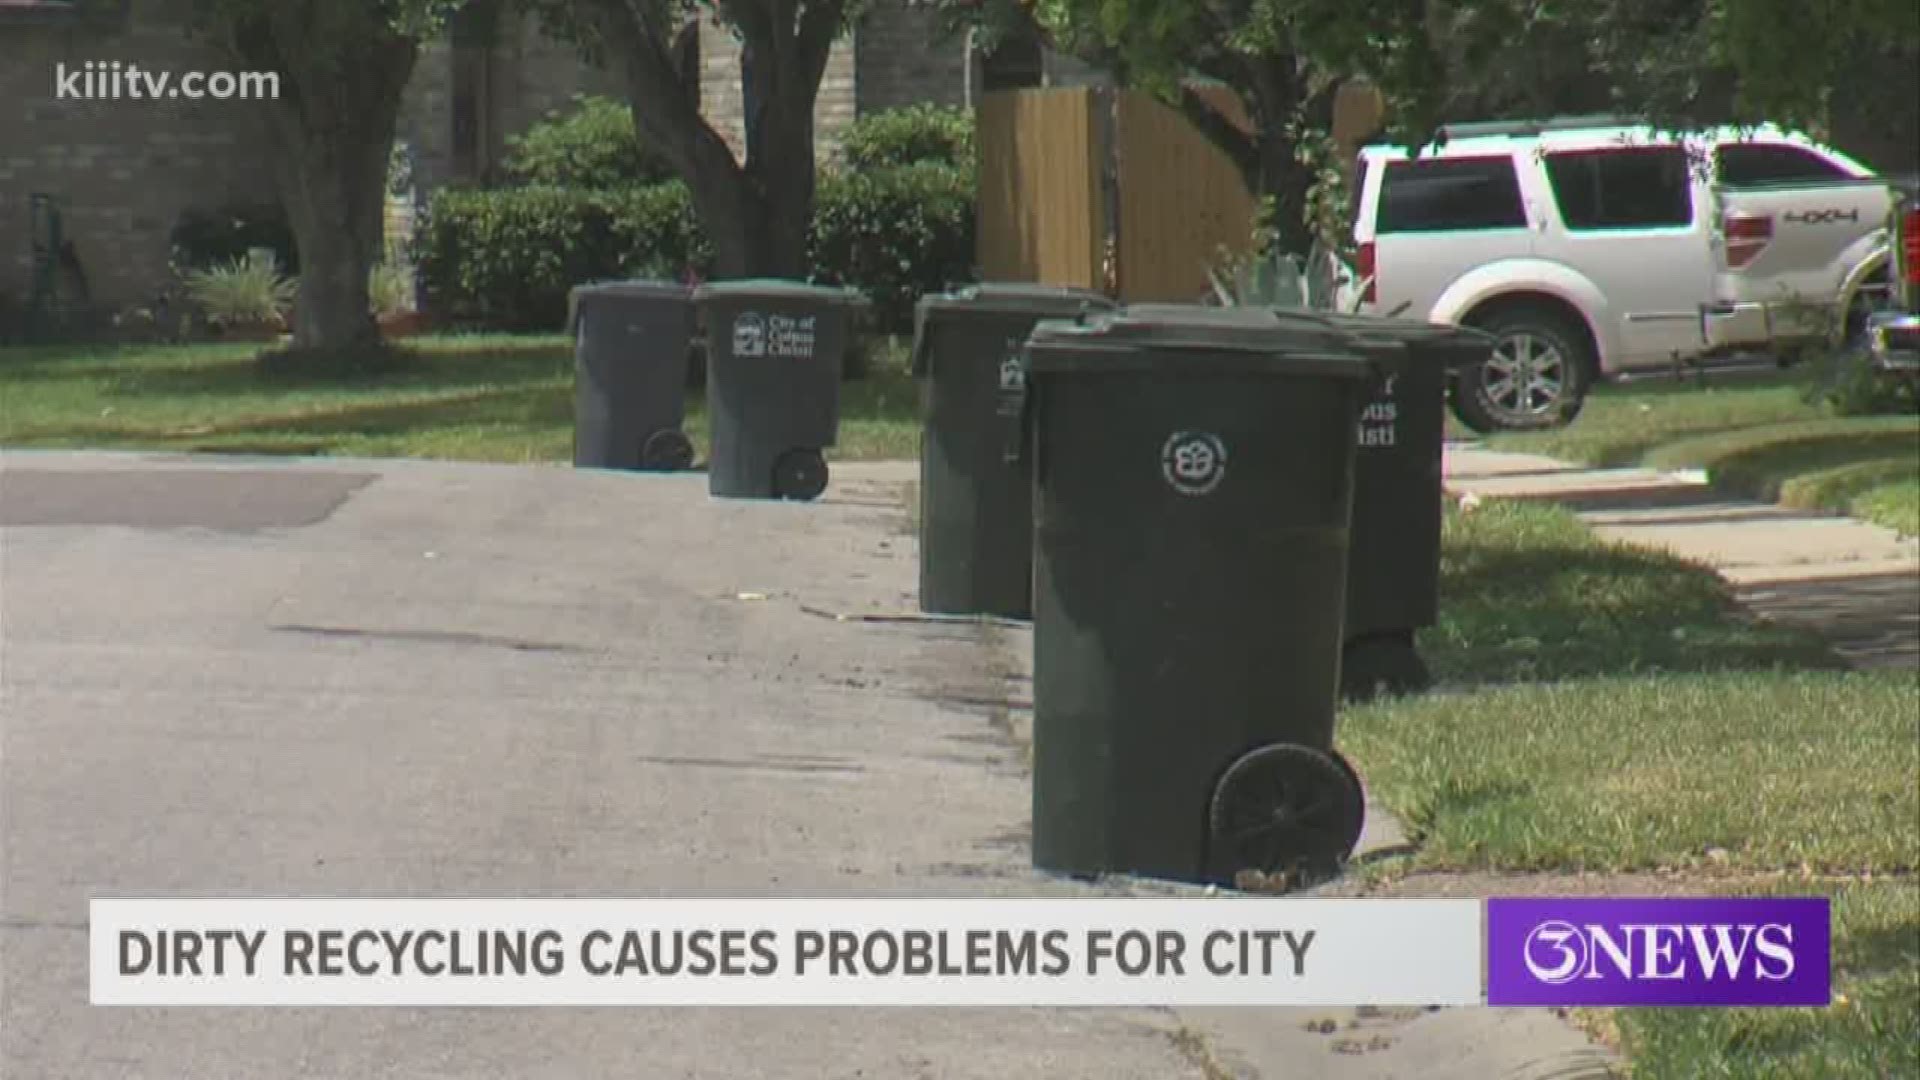 The City of Corpus Christi's Solid Waste Department needs your help keeping the recycling program clean. According to officials, about 30-percent of items put in neighborhood recycling bins to be recycled are dirty, like plastic cups that people throw out that still have liquid inside.